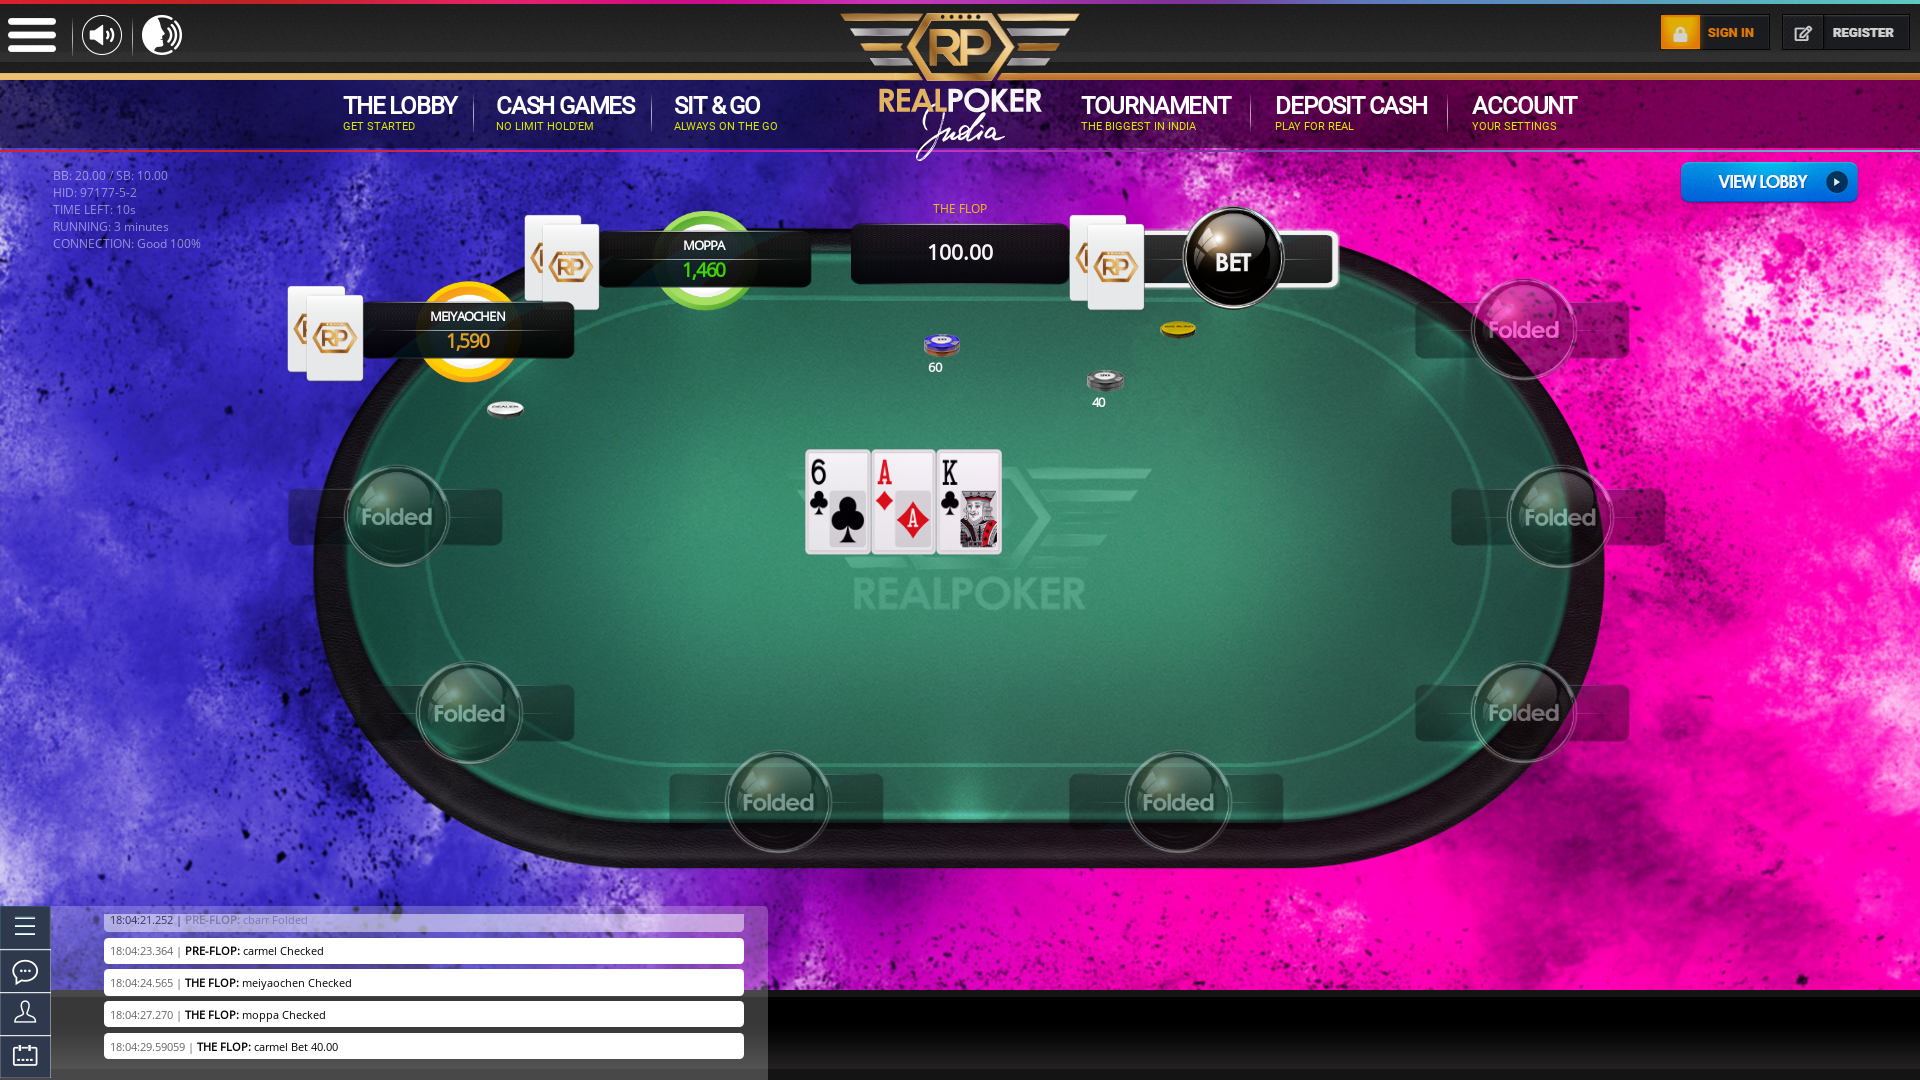 Real poker on a 10 player table in the 3rd minute of the game